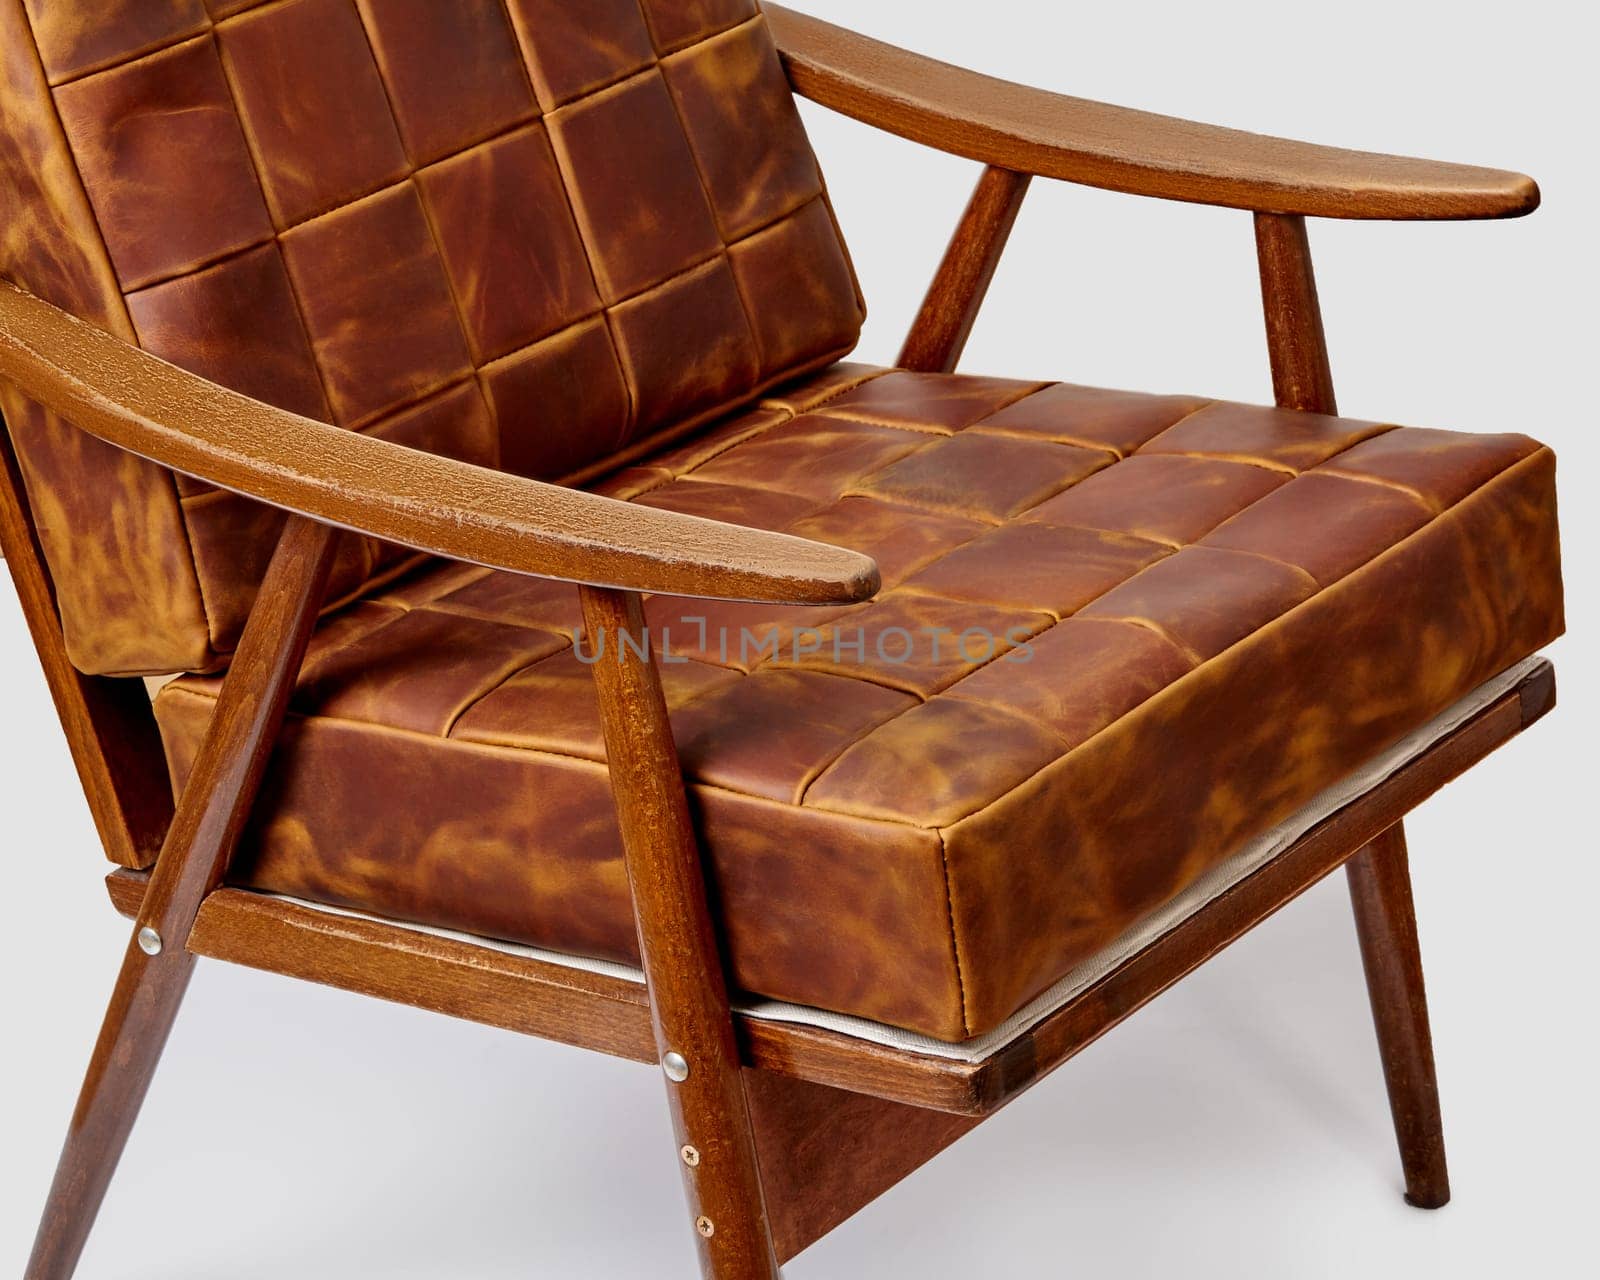 Closeup of high-quality padded soft cushions made of neatly stitched patches of patinated brown leather complementing vintage style wooden chair, blending luxury with comfort